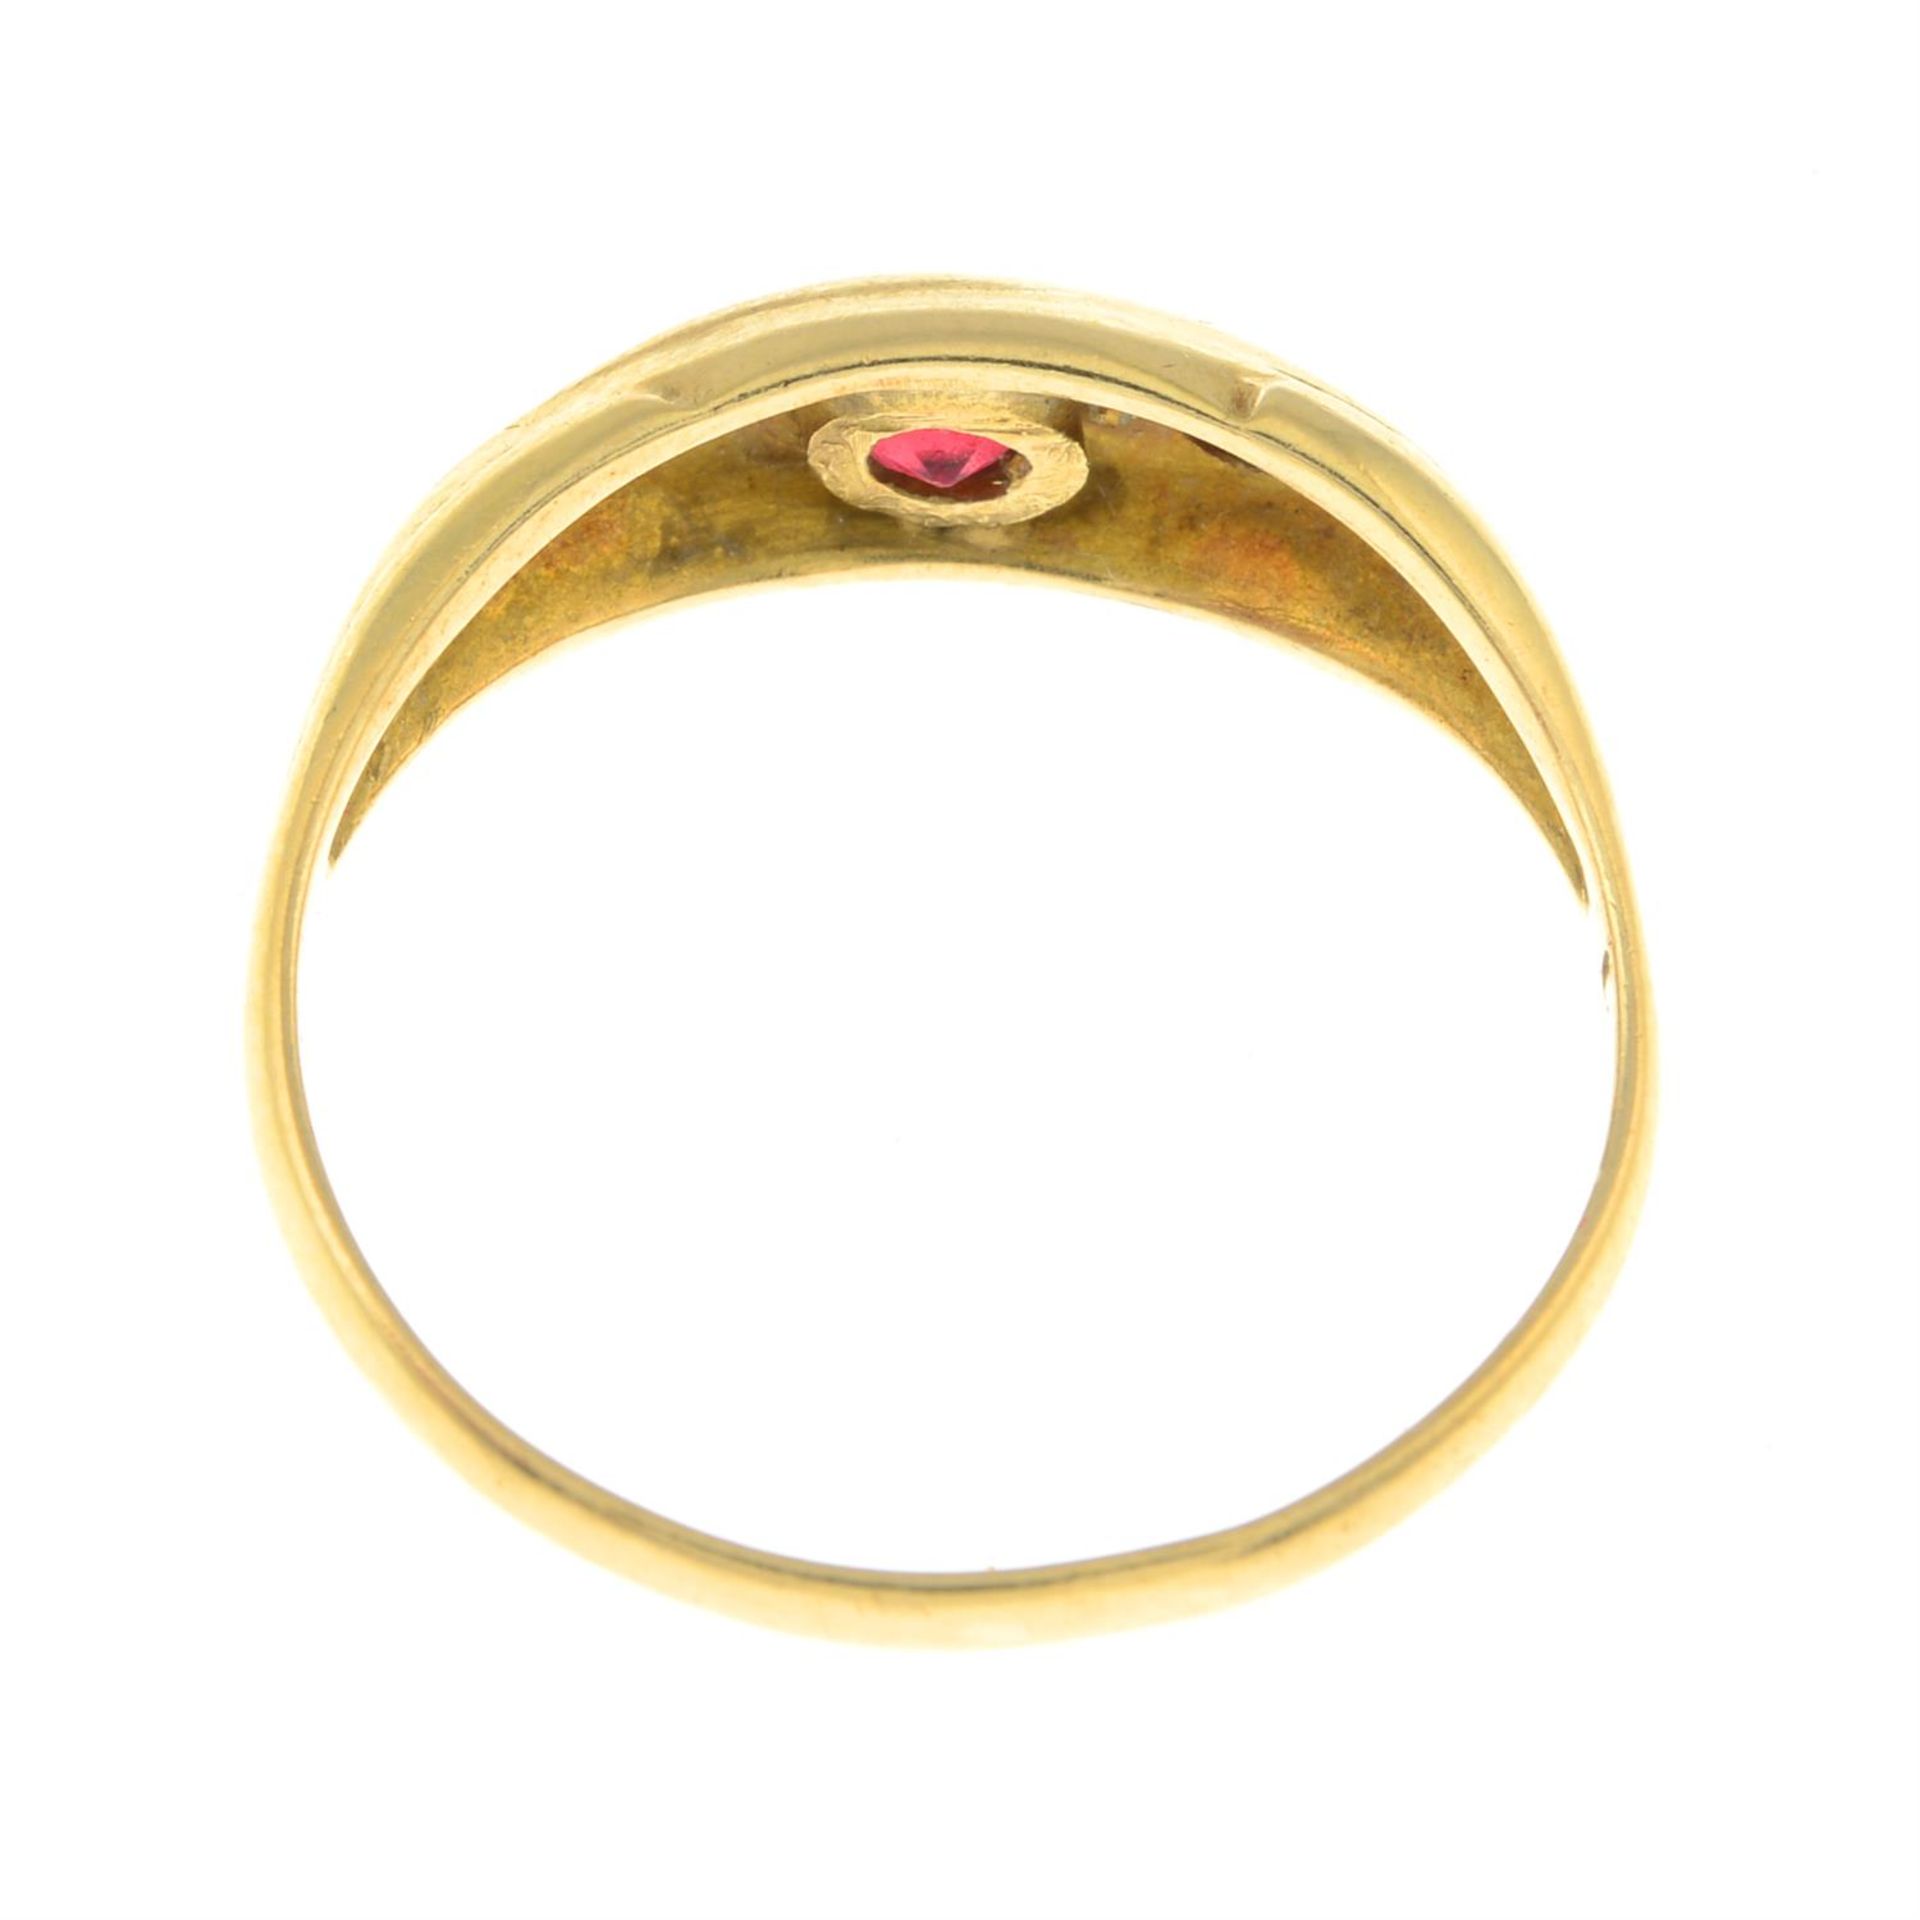 An early 20th century 18ct gold garnet-topped doublet, garnet and rose-cut diamond ring. - Image 2 of 2